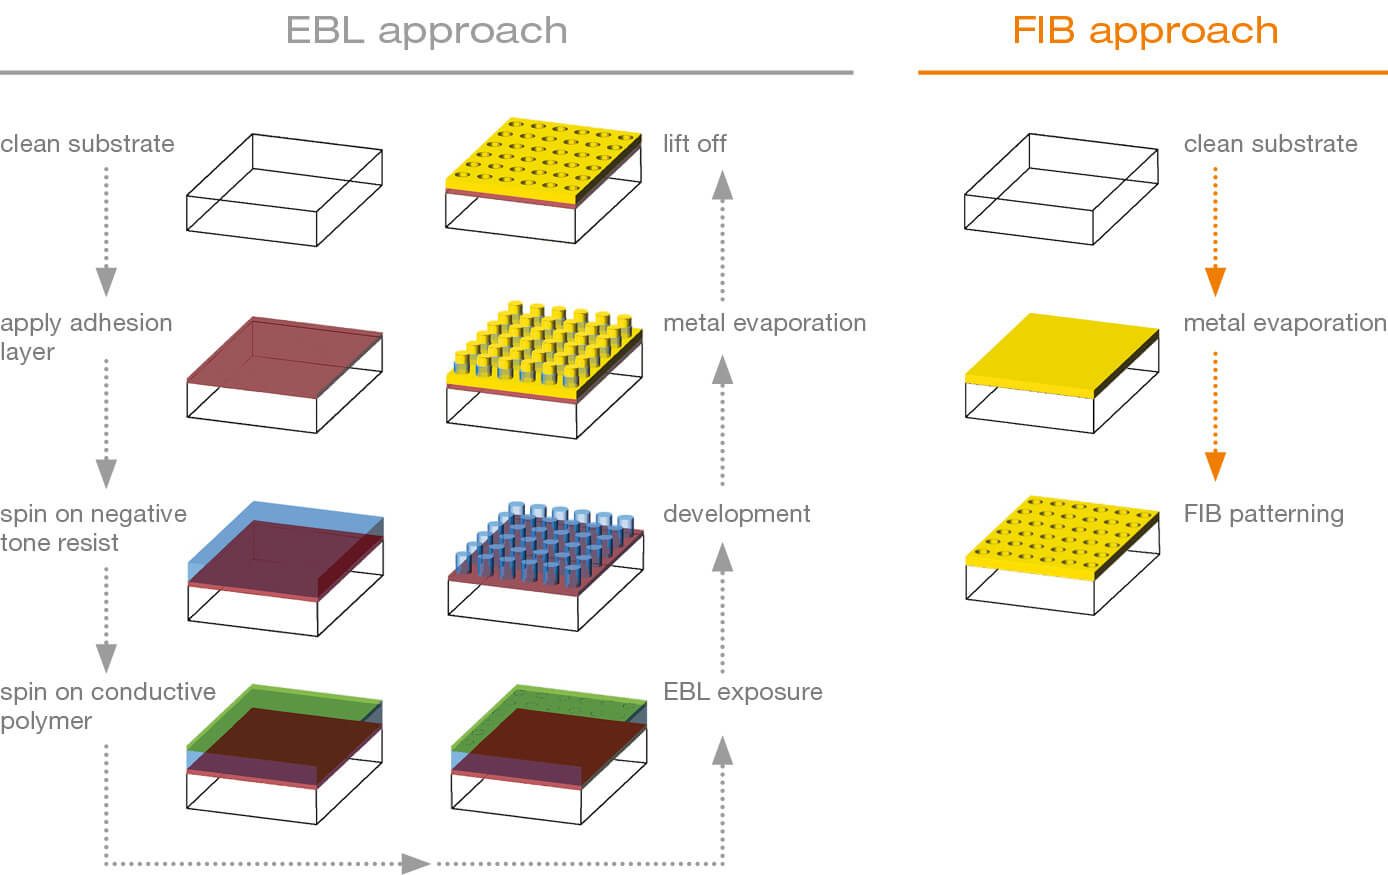 Illustration comparing the EBL with the FIB approach